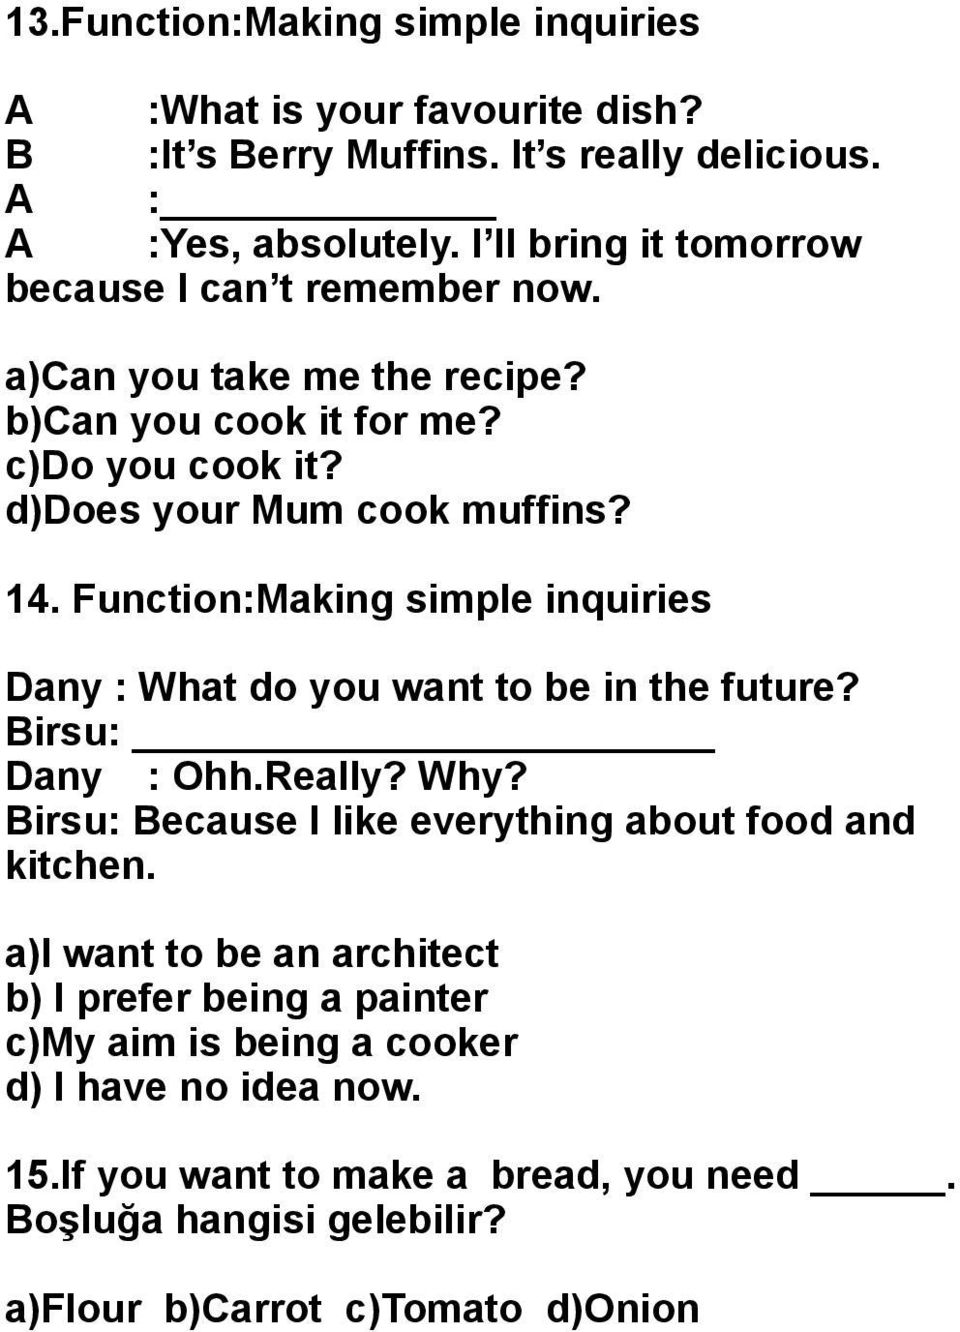 Function:Making simple inquiries Dany : What do you want to be in the future? Birsu: Dany : Ohh.Really? Why? Birsu: Because I like everything about food and kitchen.